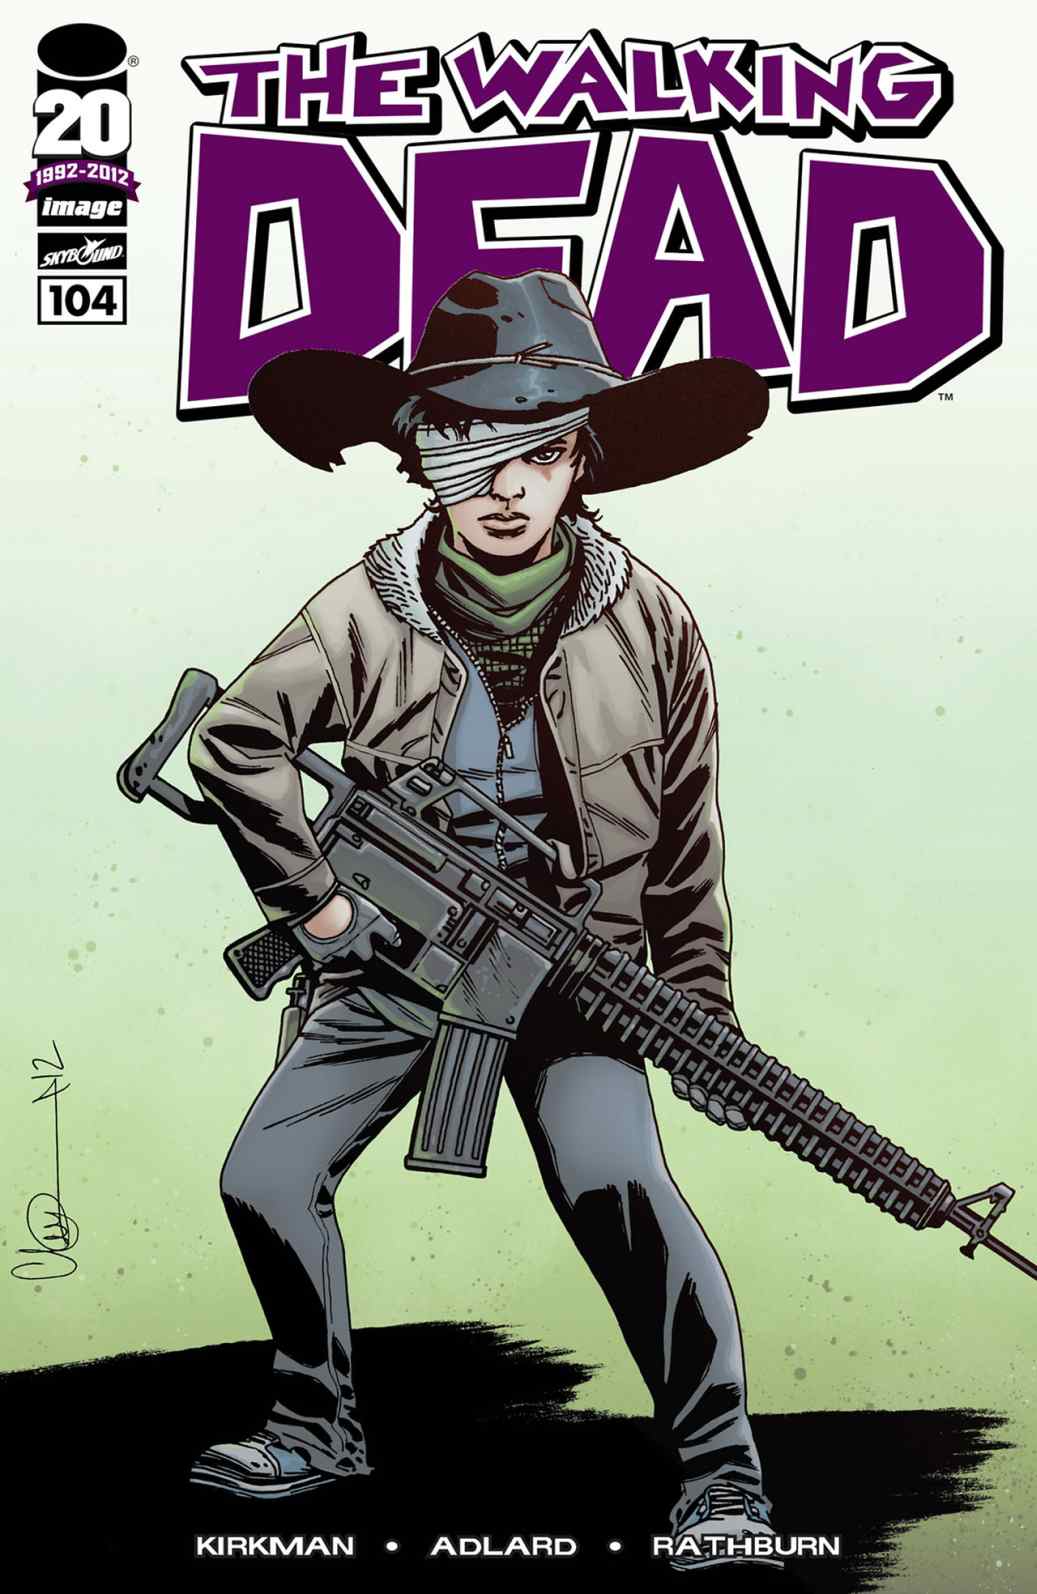 the-walking-dead-comic-book-issue-104-cover.jpg